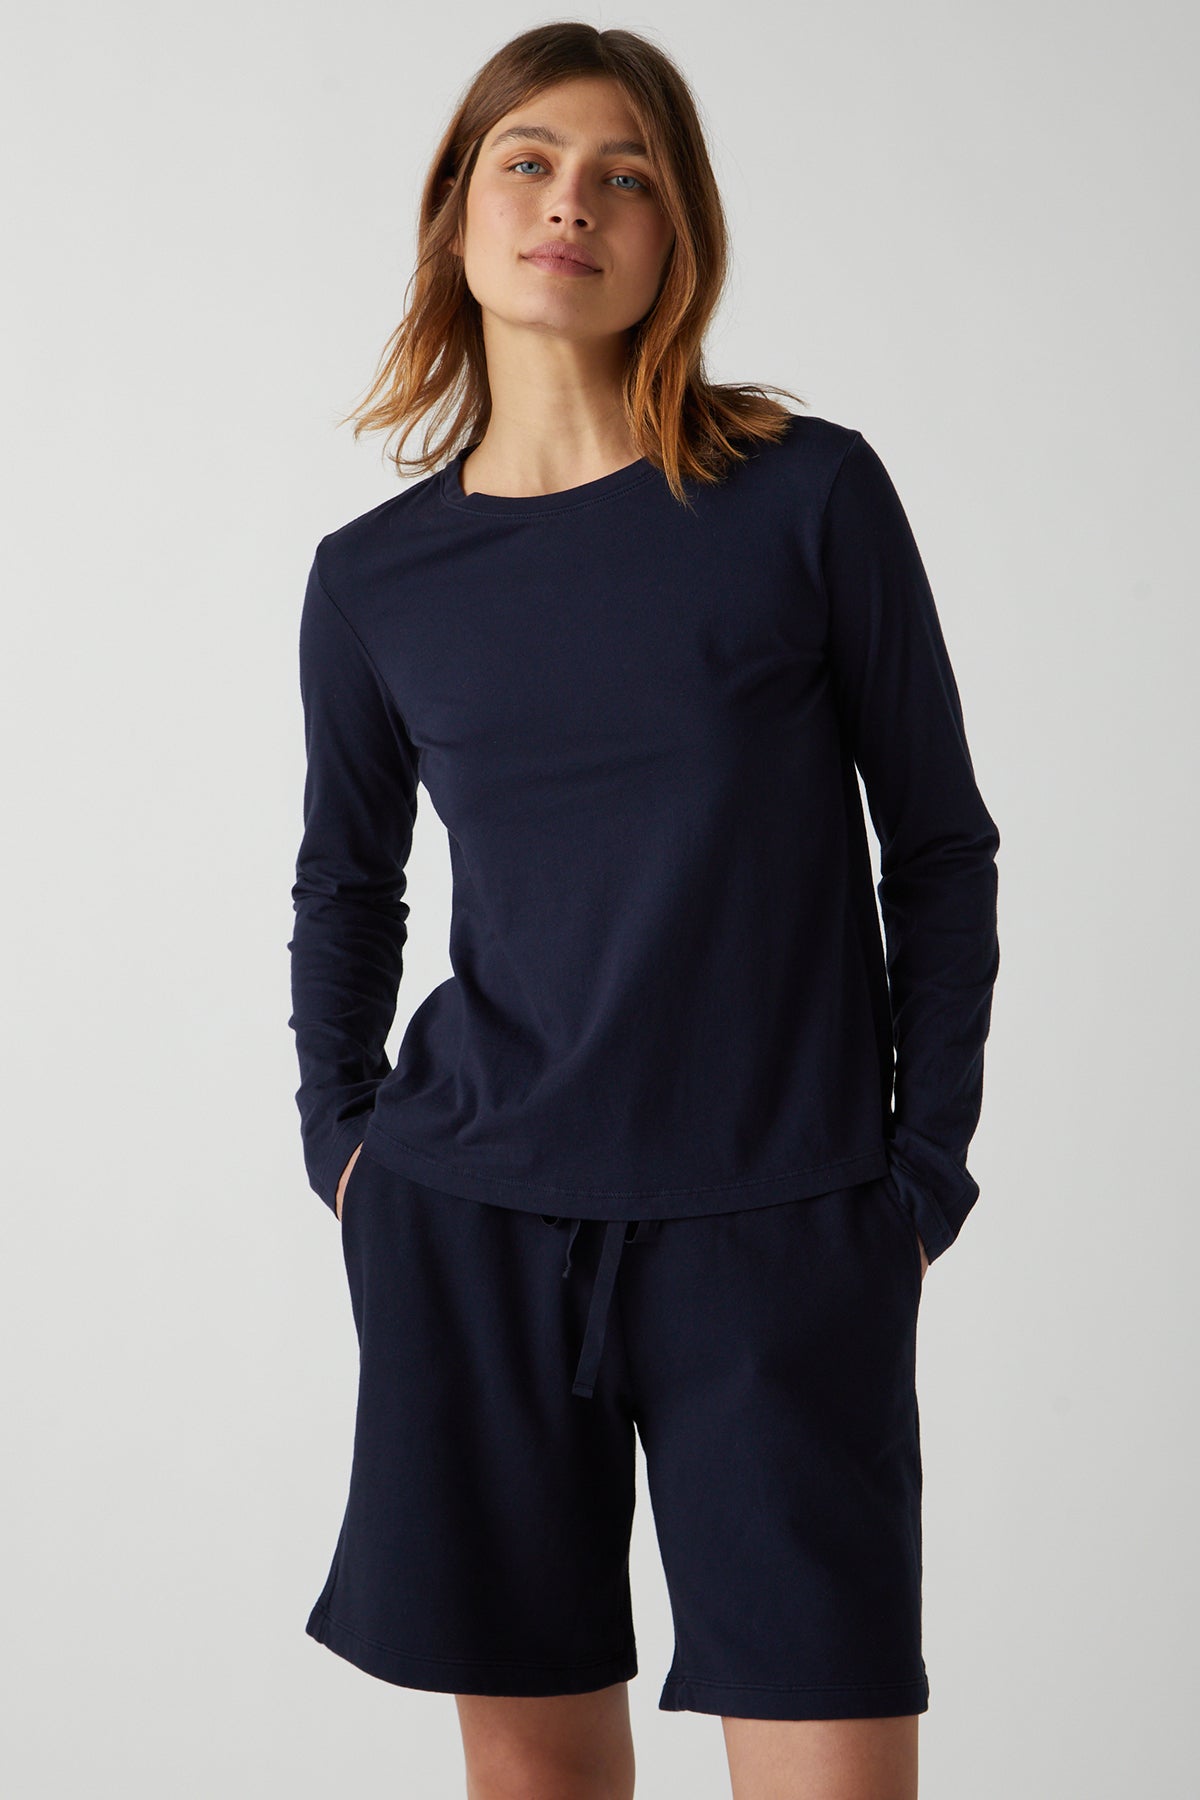 the model is wearing a navy long-sleeved top and Velvet by Jenny Graham LAGUNA SWEATSHORT.-26019334947009